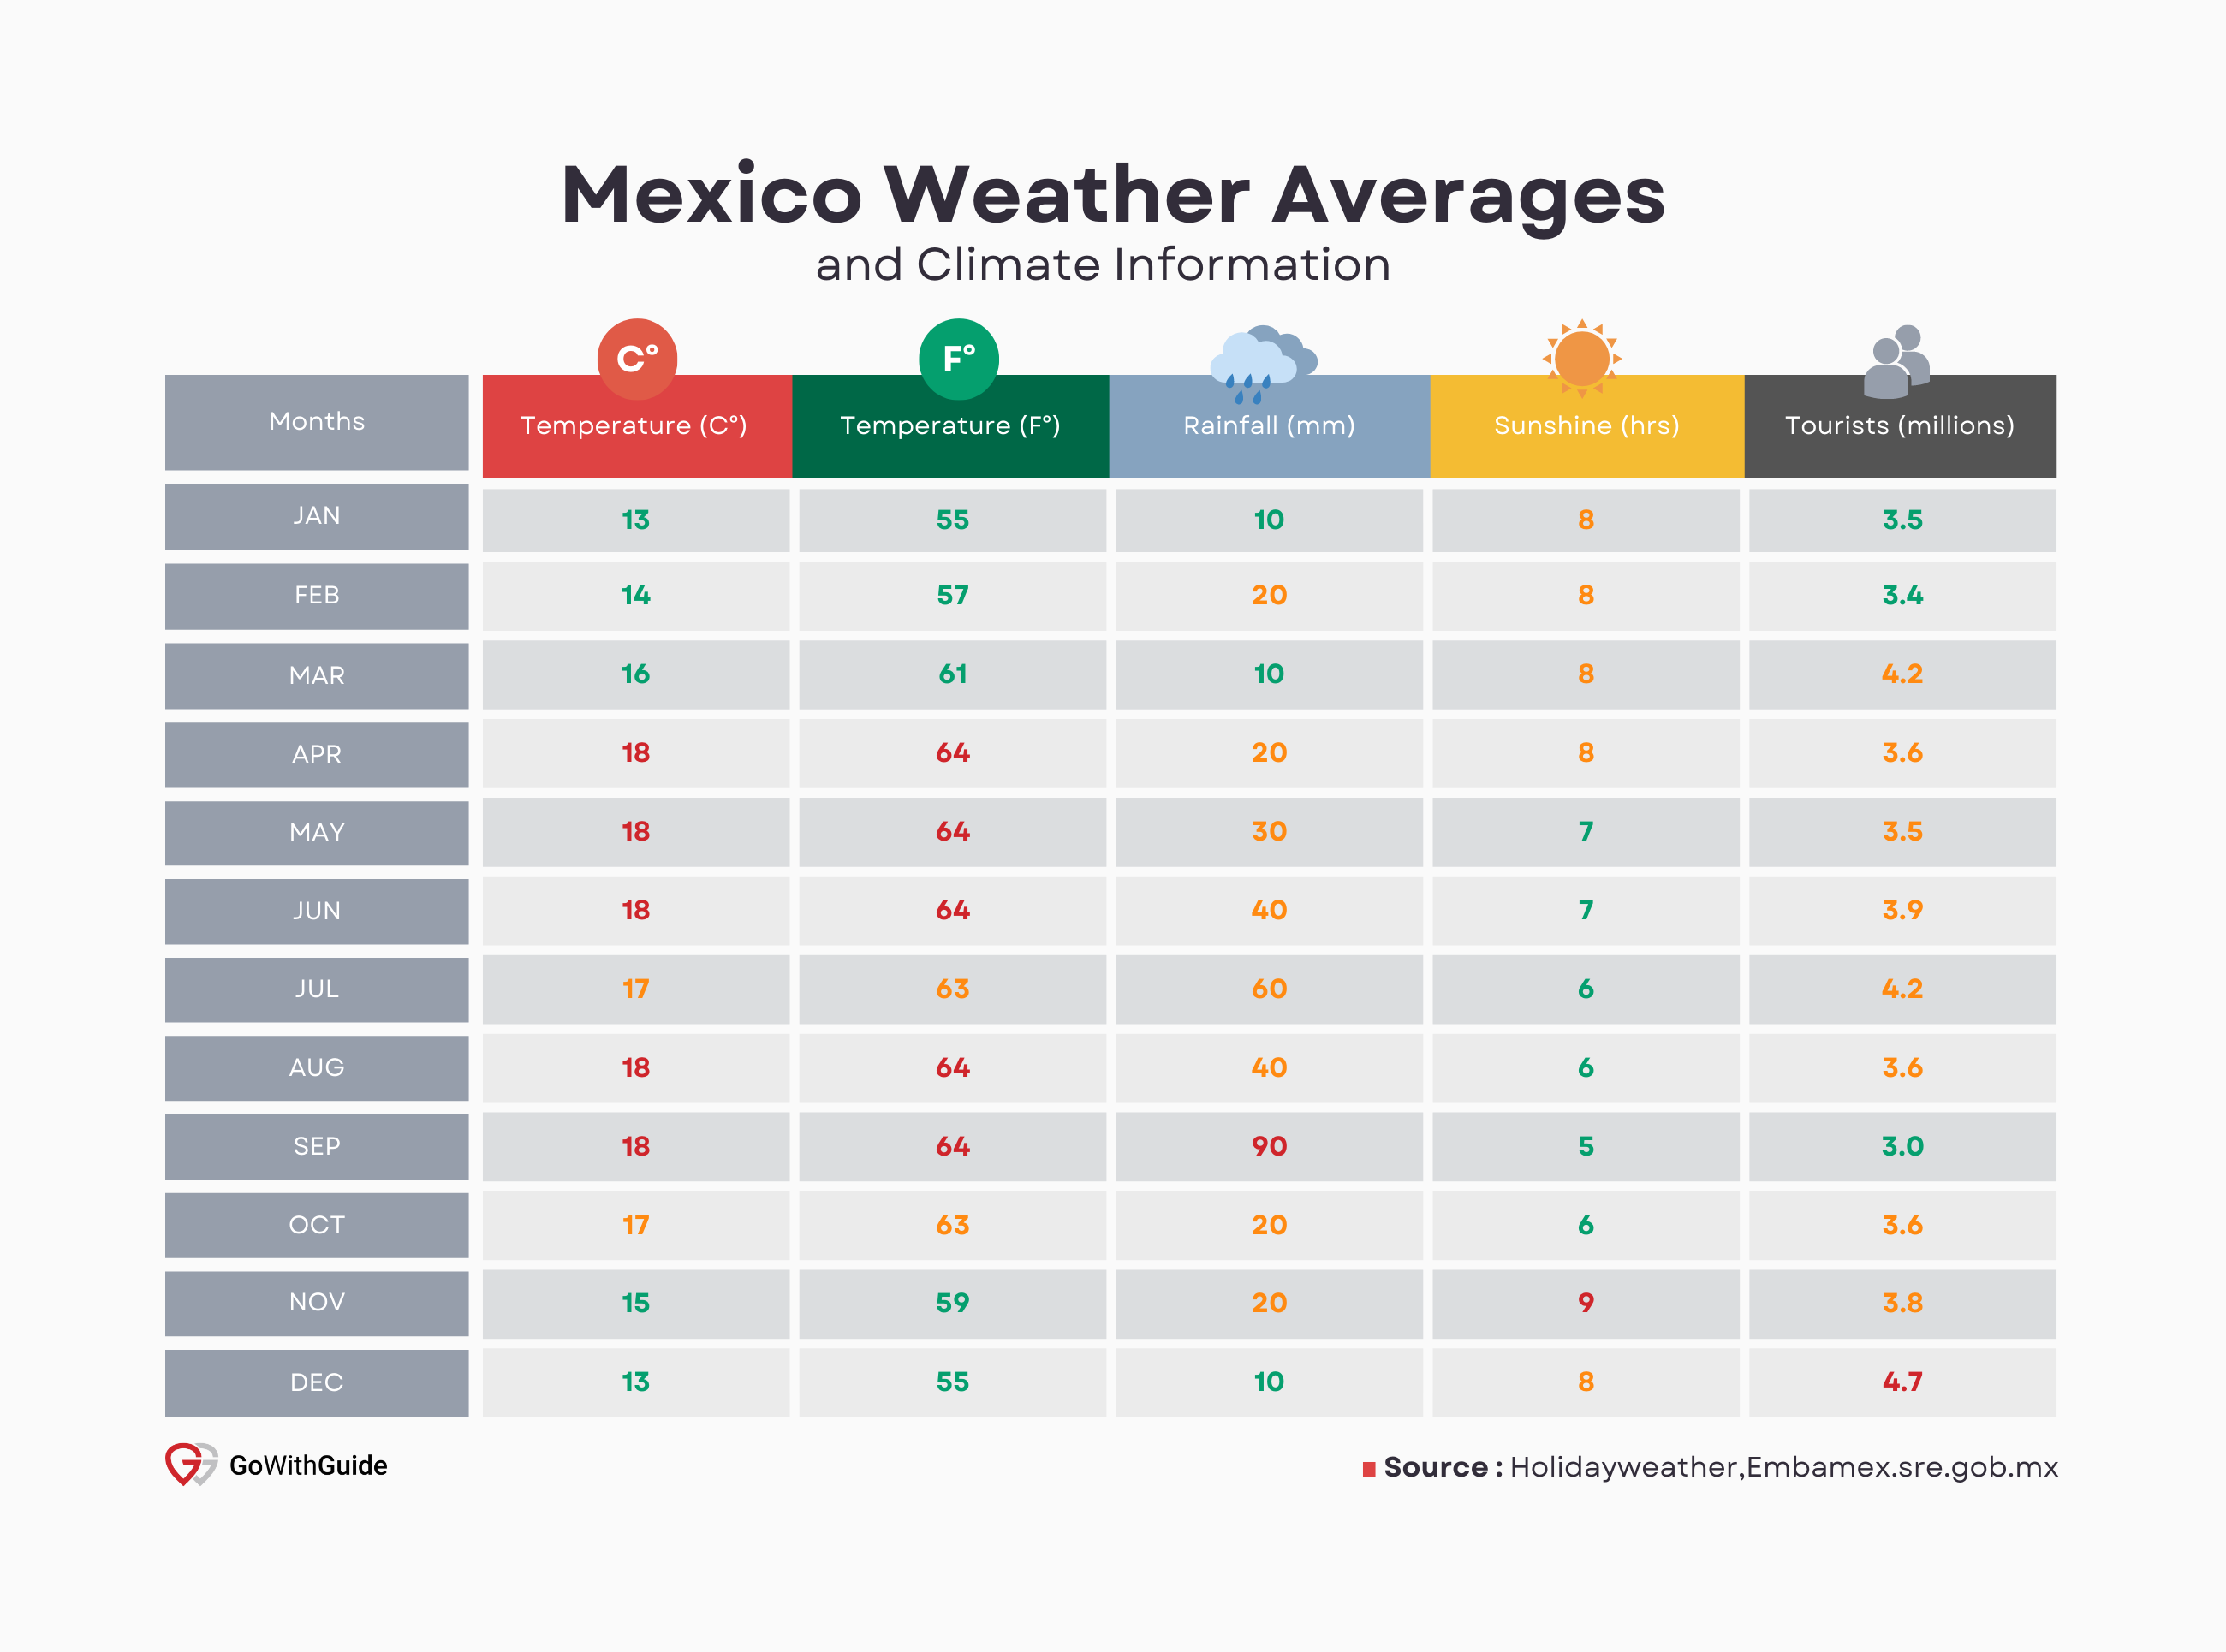 Mexico Annual Weather - Tourists